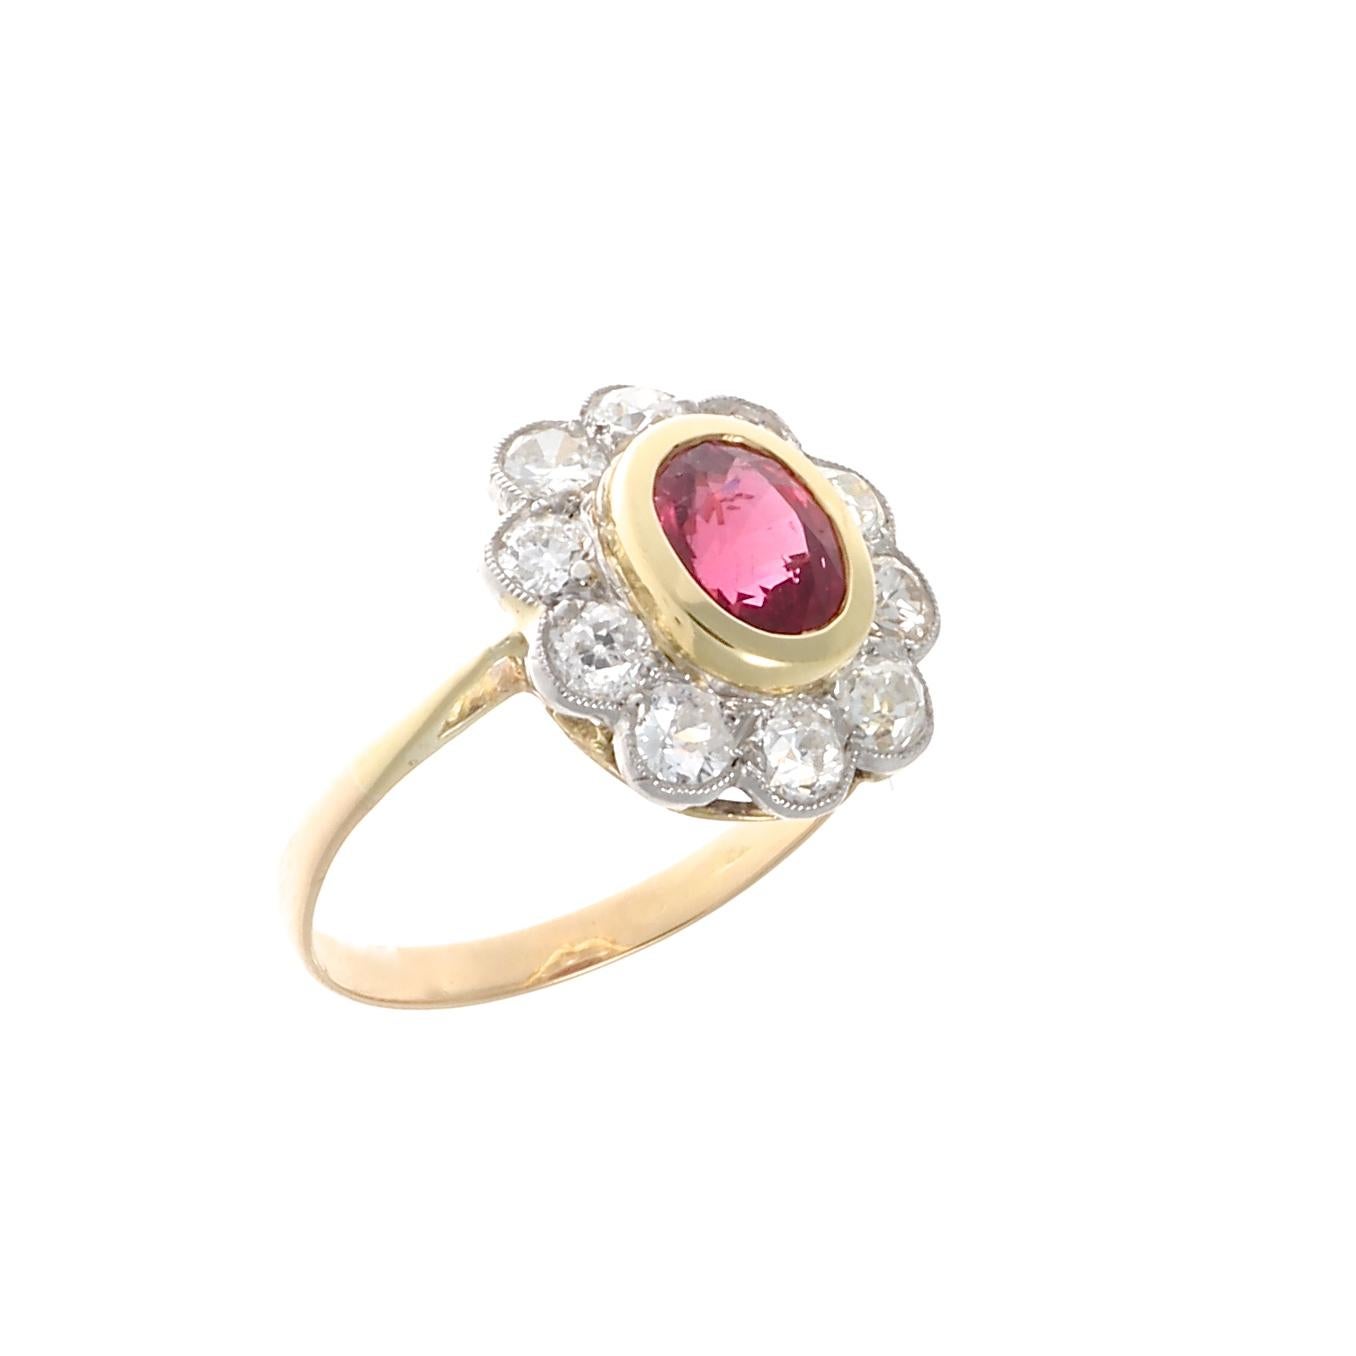 The iconic flower motif, a quintessential jewelry design capturing everything that’s beautiful about the natural world. Used for centuries in jewelry it has taken on many forms and colors. Featuring a lively red AGL certified Mozambique ruby that